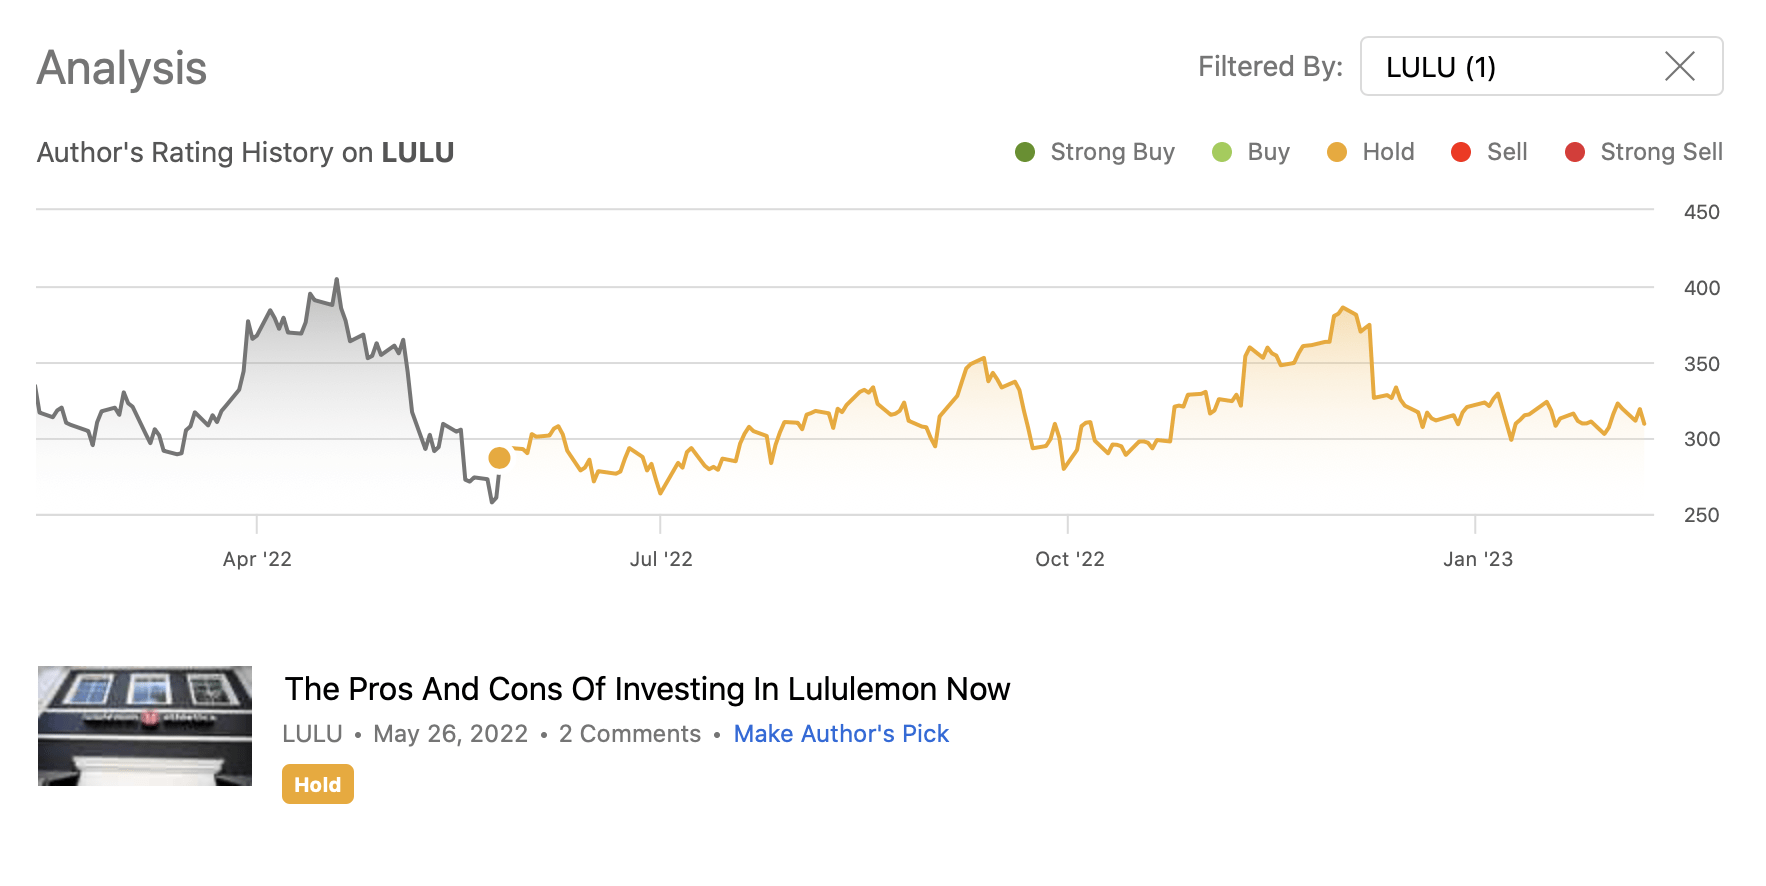 LULU Stock Is Extended. Can You Still Participate With Options?